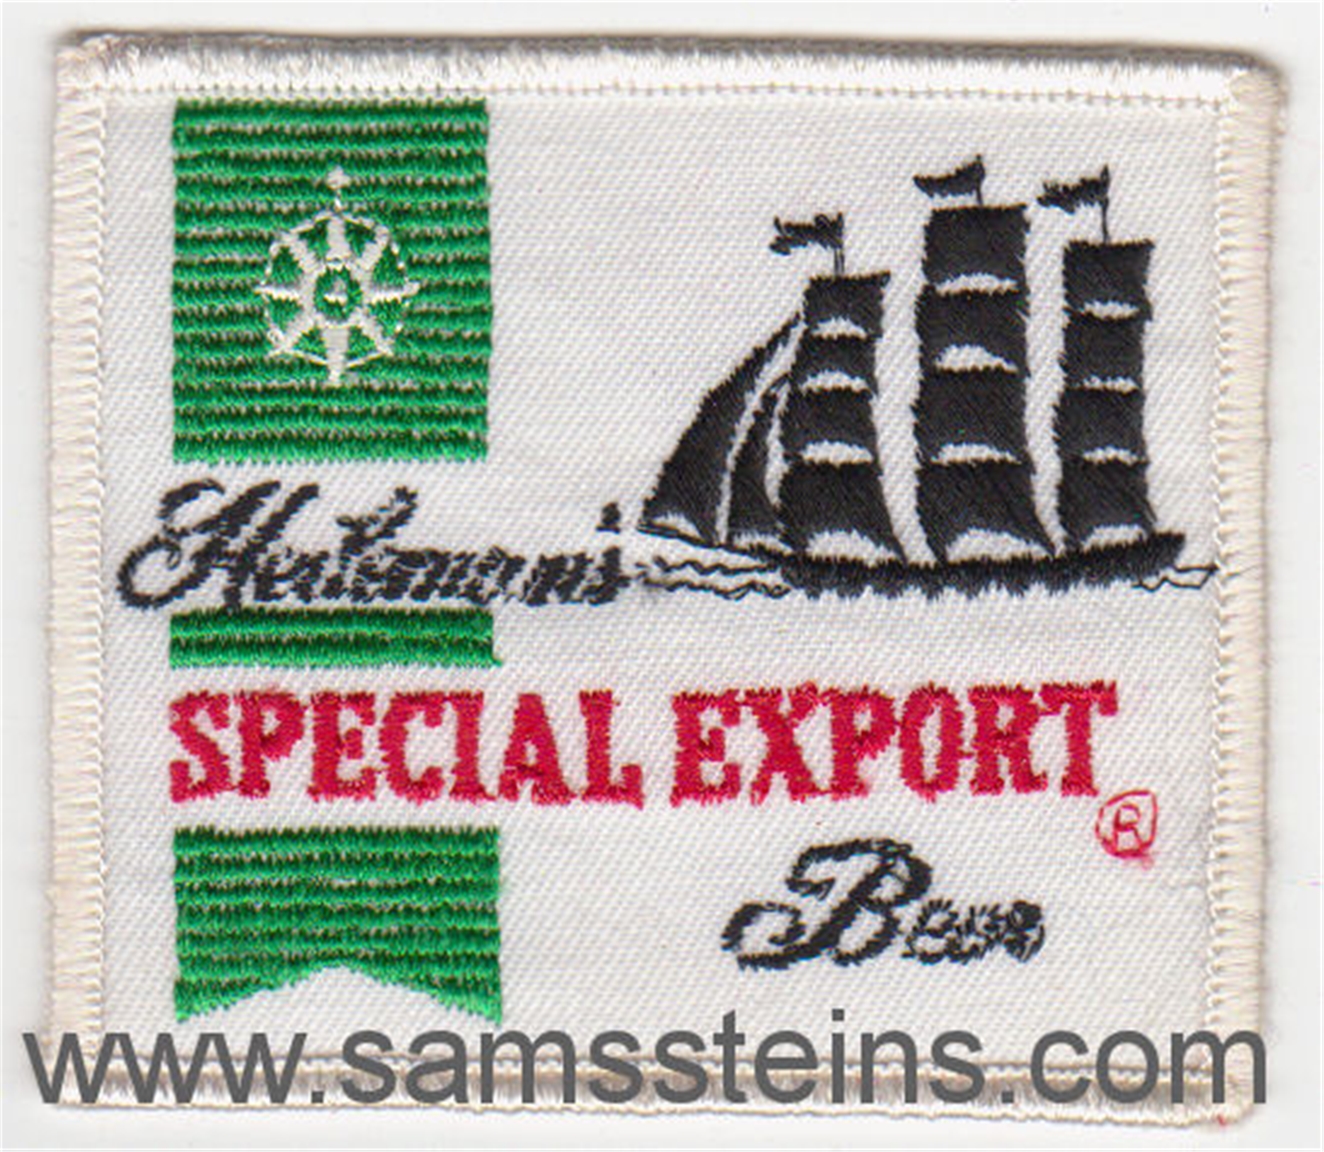 Special Export Clipper Ship Square Beer Patch